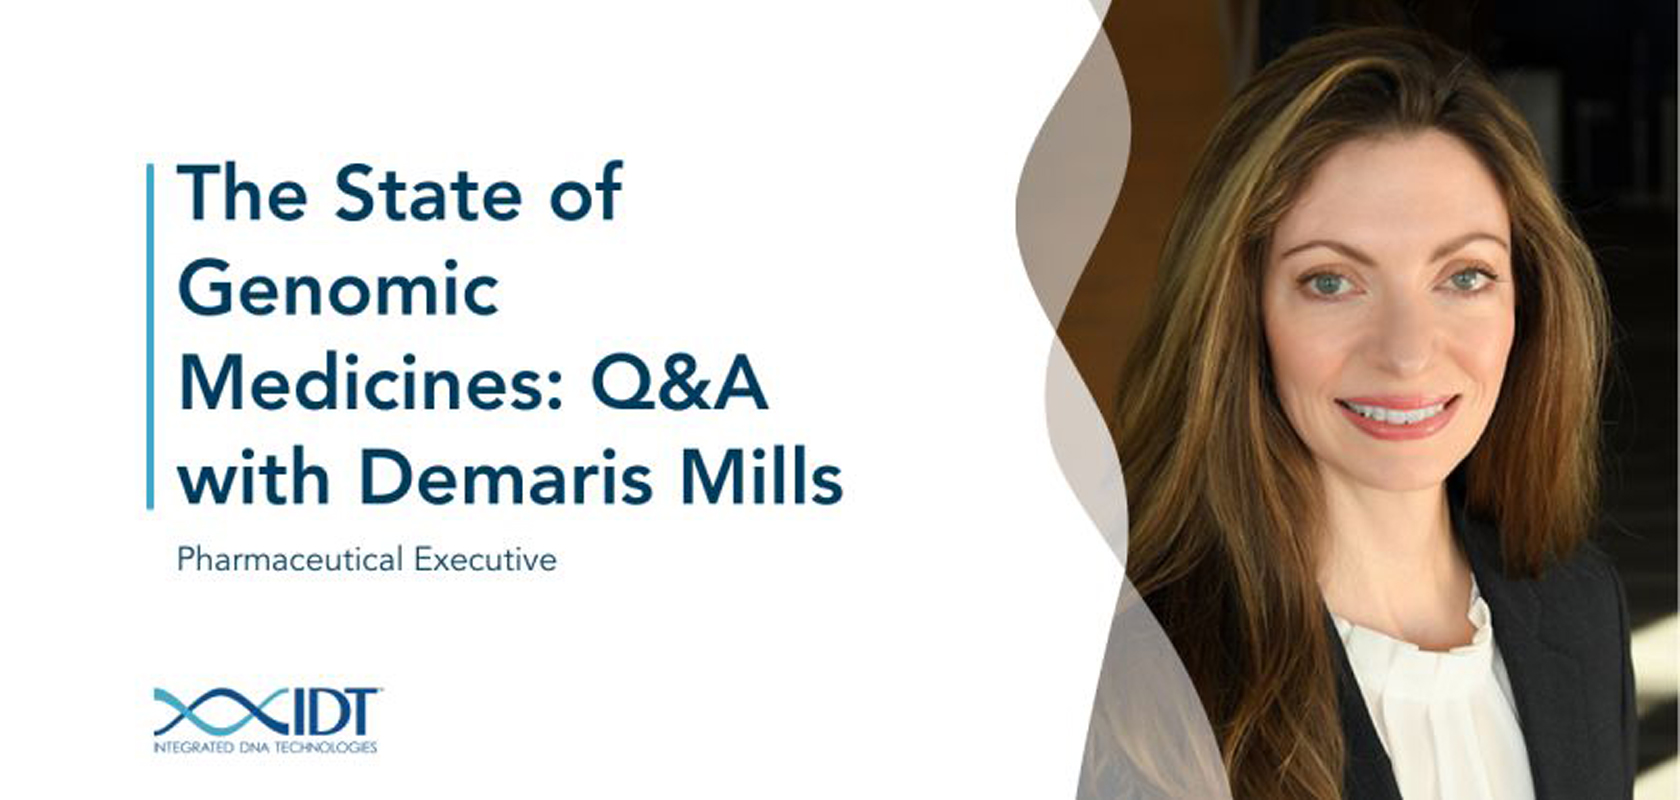 The State of Genomic Medicines: Q&A with Demaris Mills